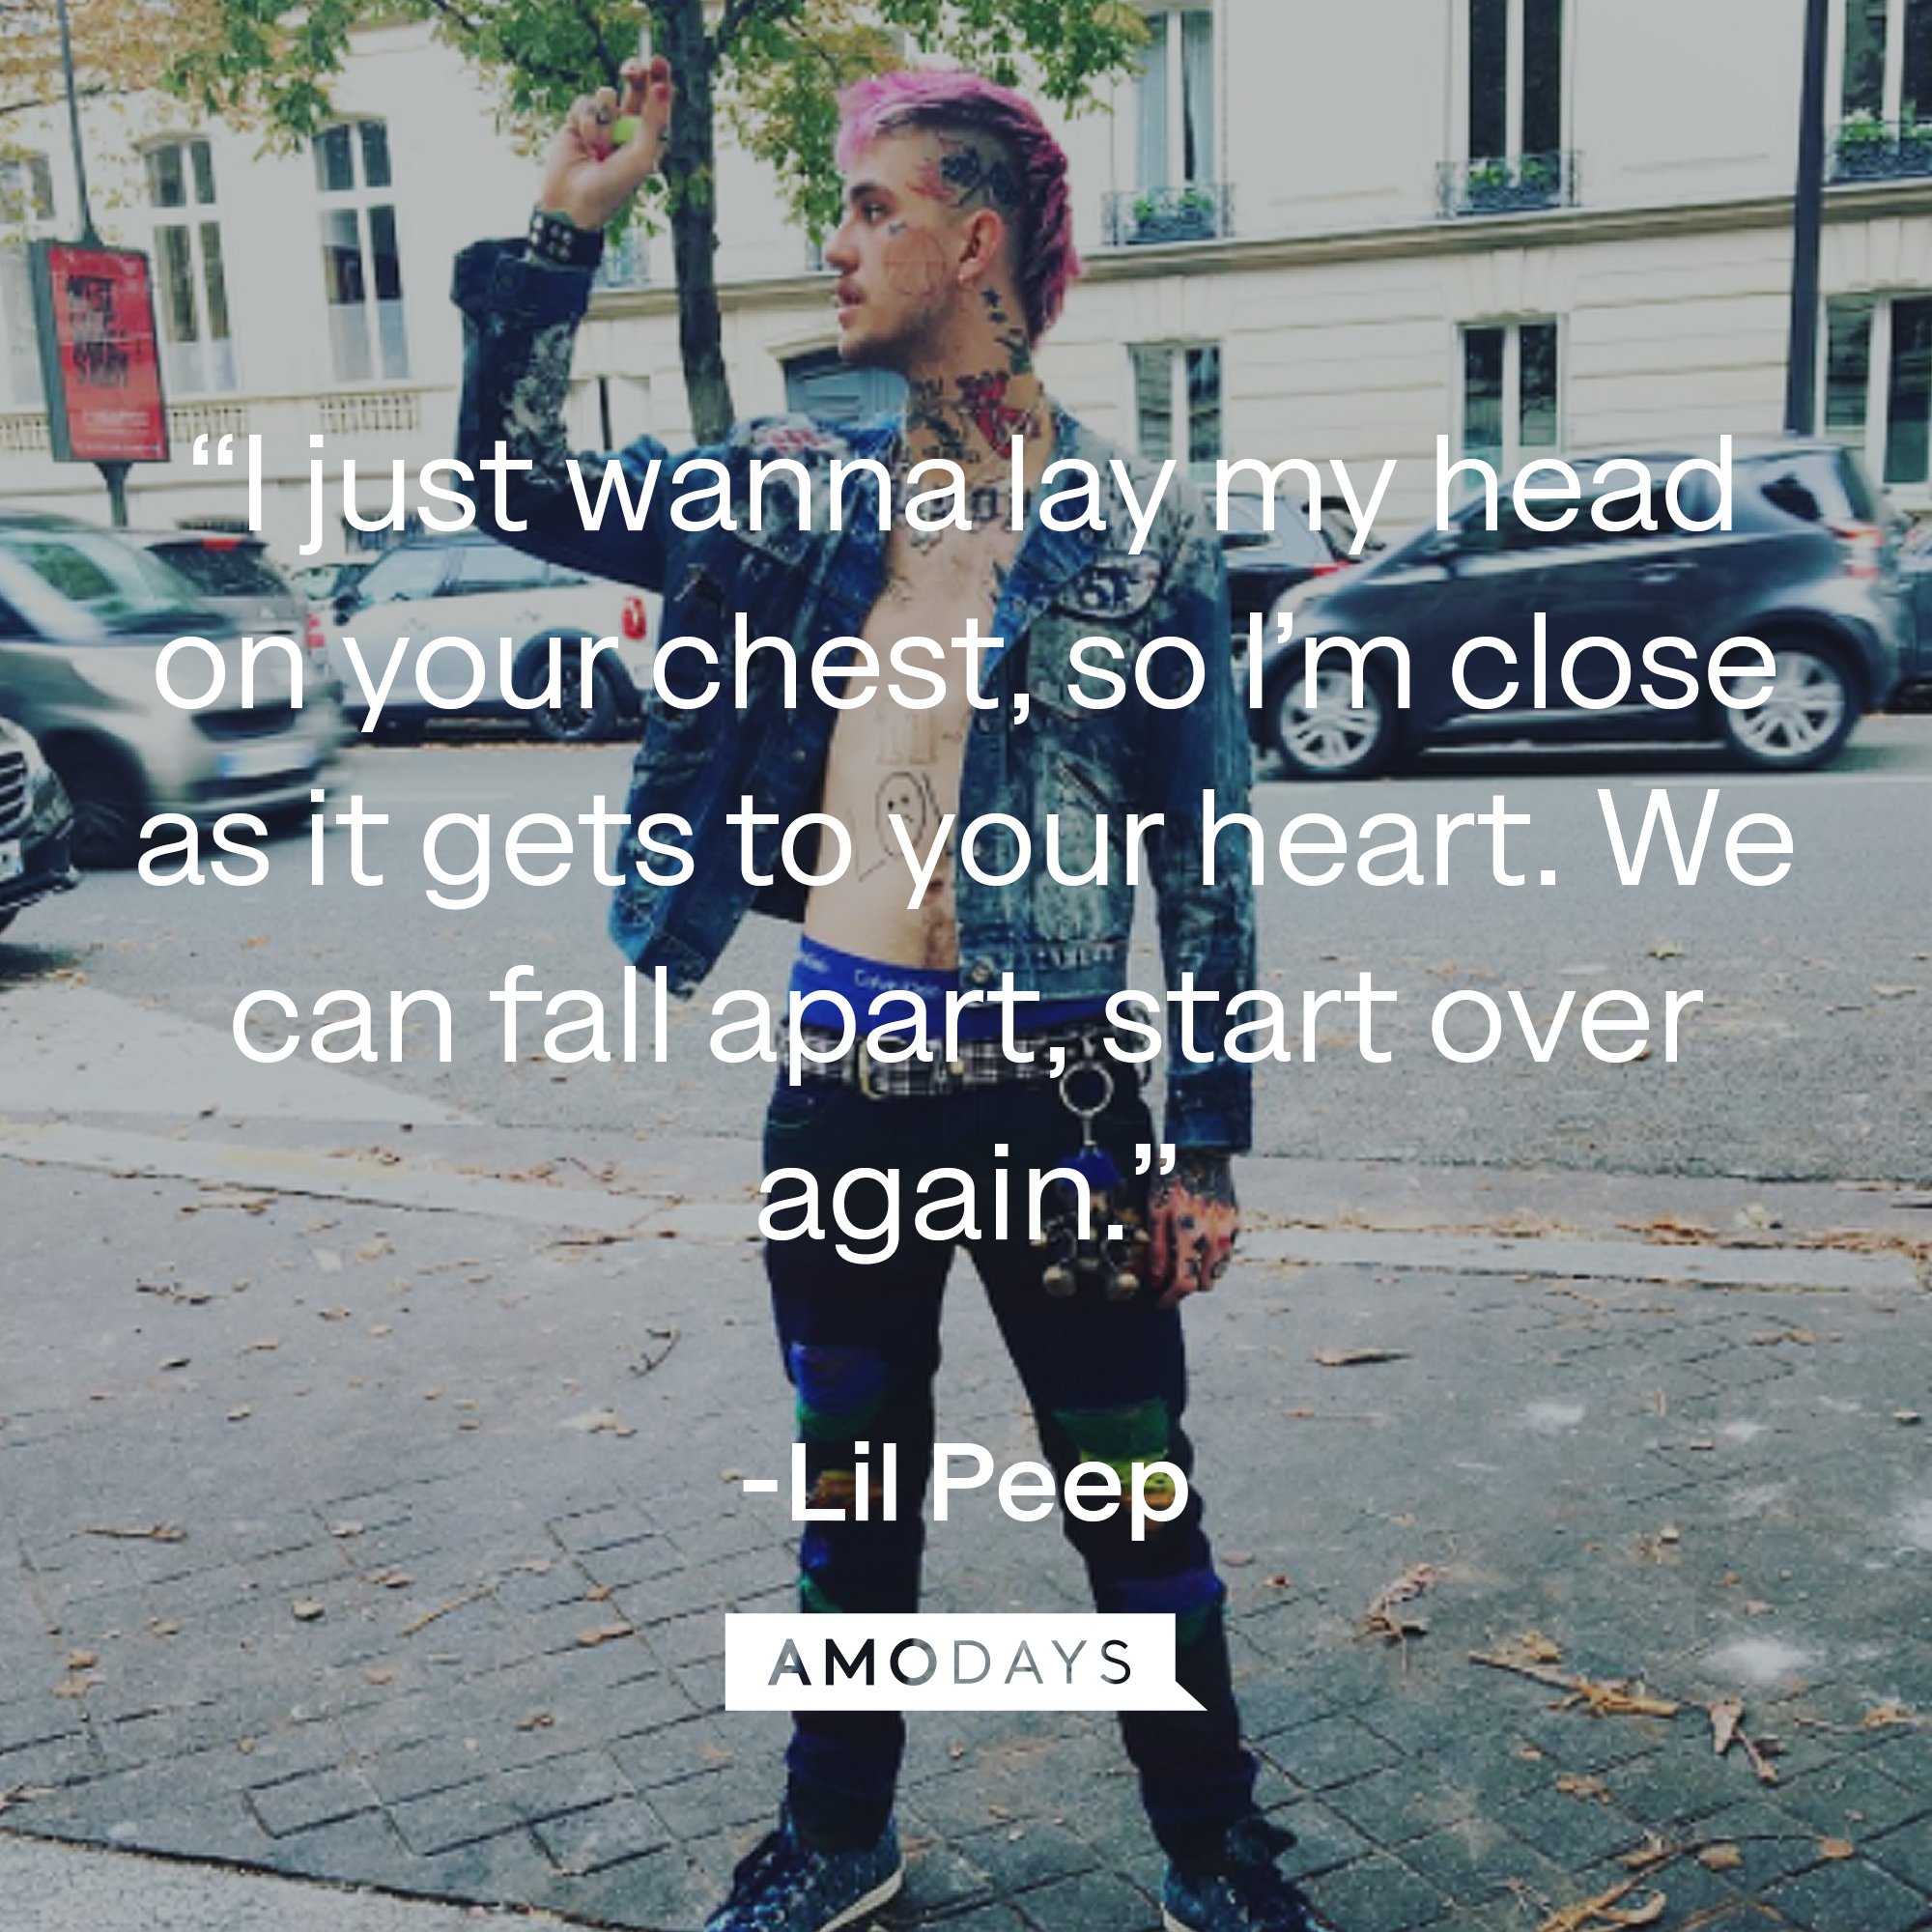 Lil Peep's quote: “I just wanna lay my head on your chest, so I’m close as it gets to your heart. We can fall apart, start over again.” | Image: AmoDays